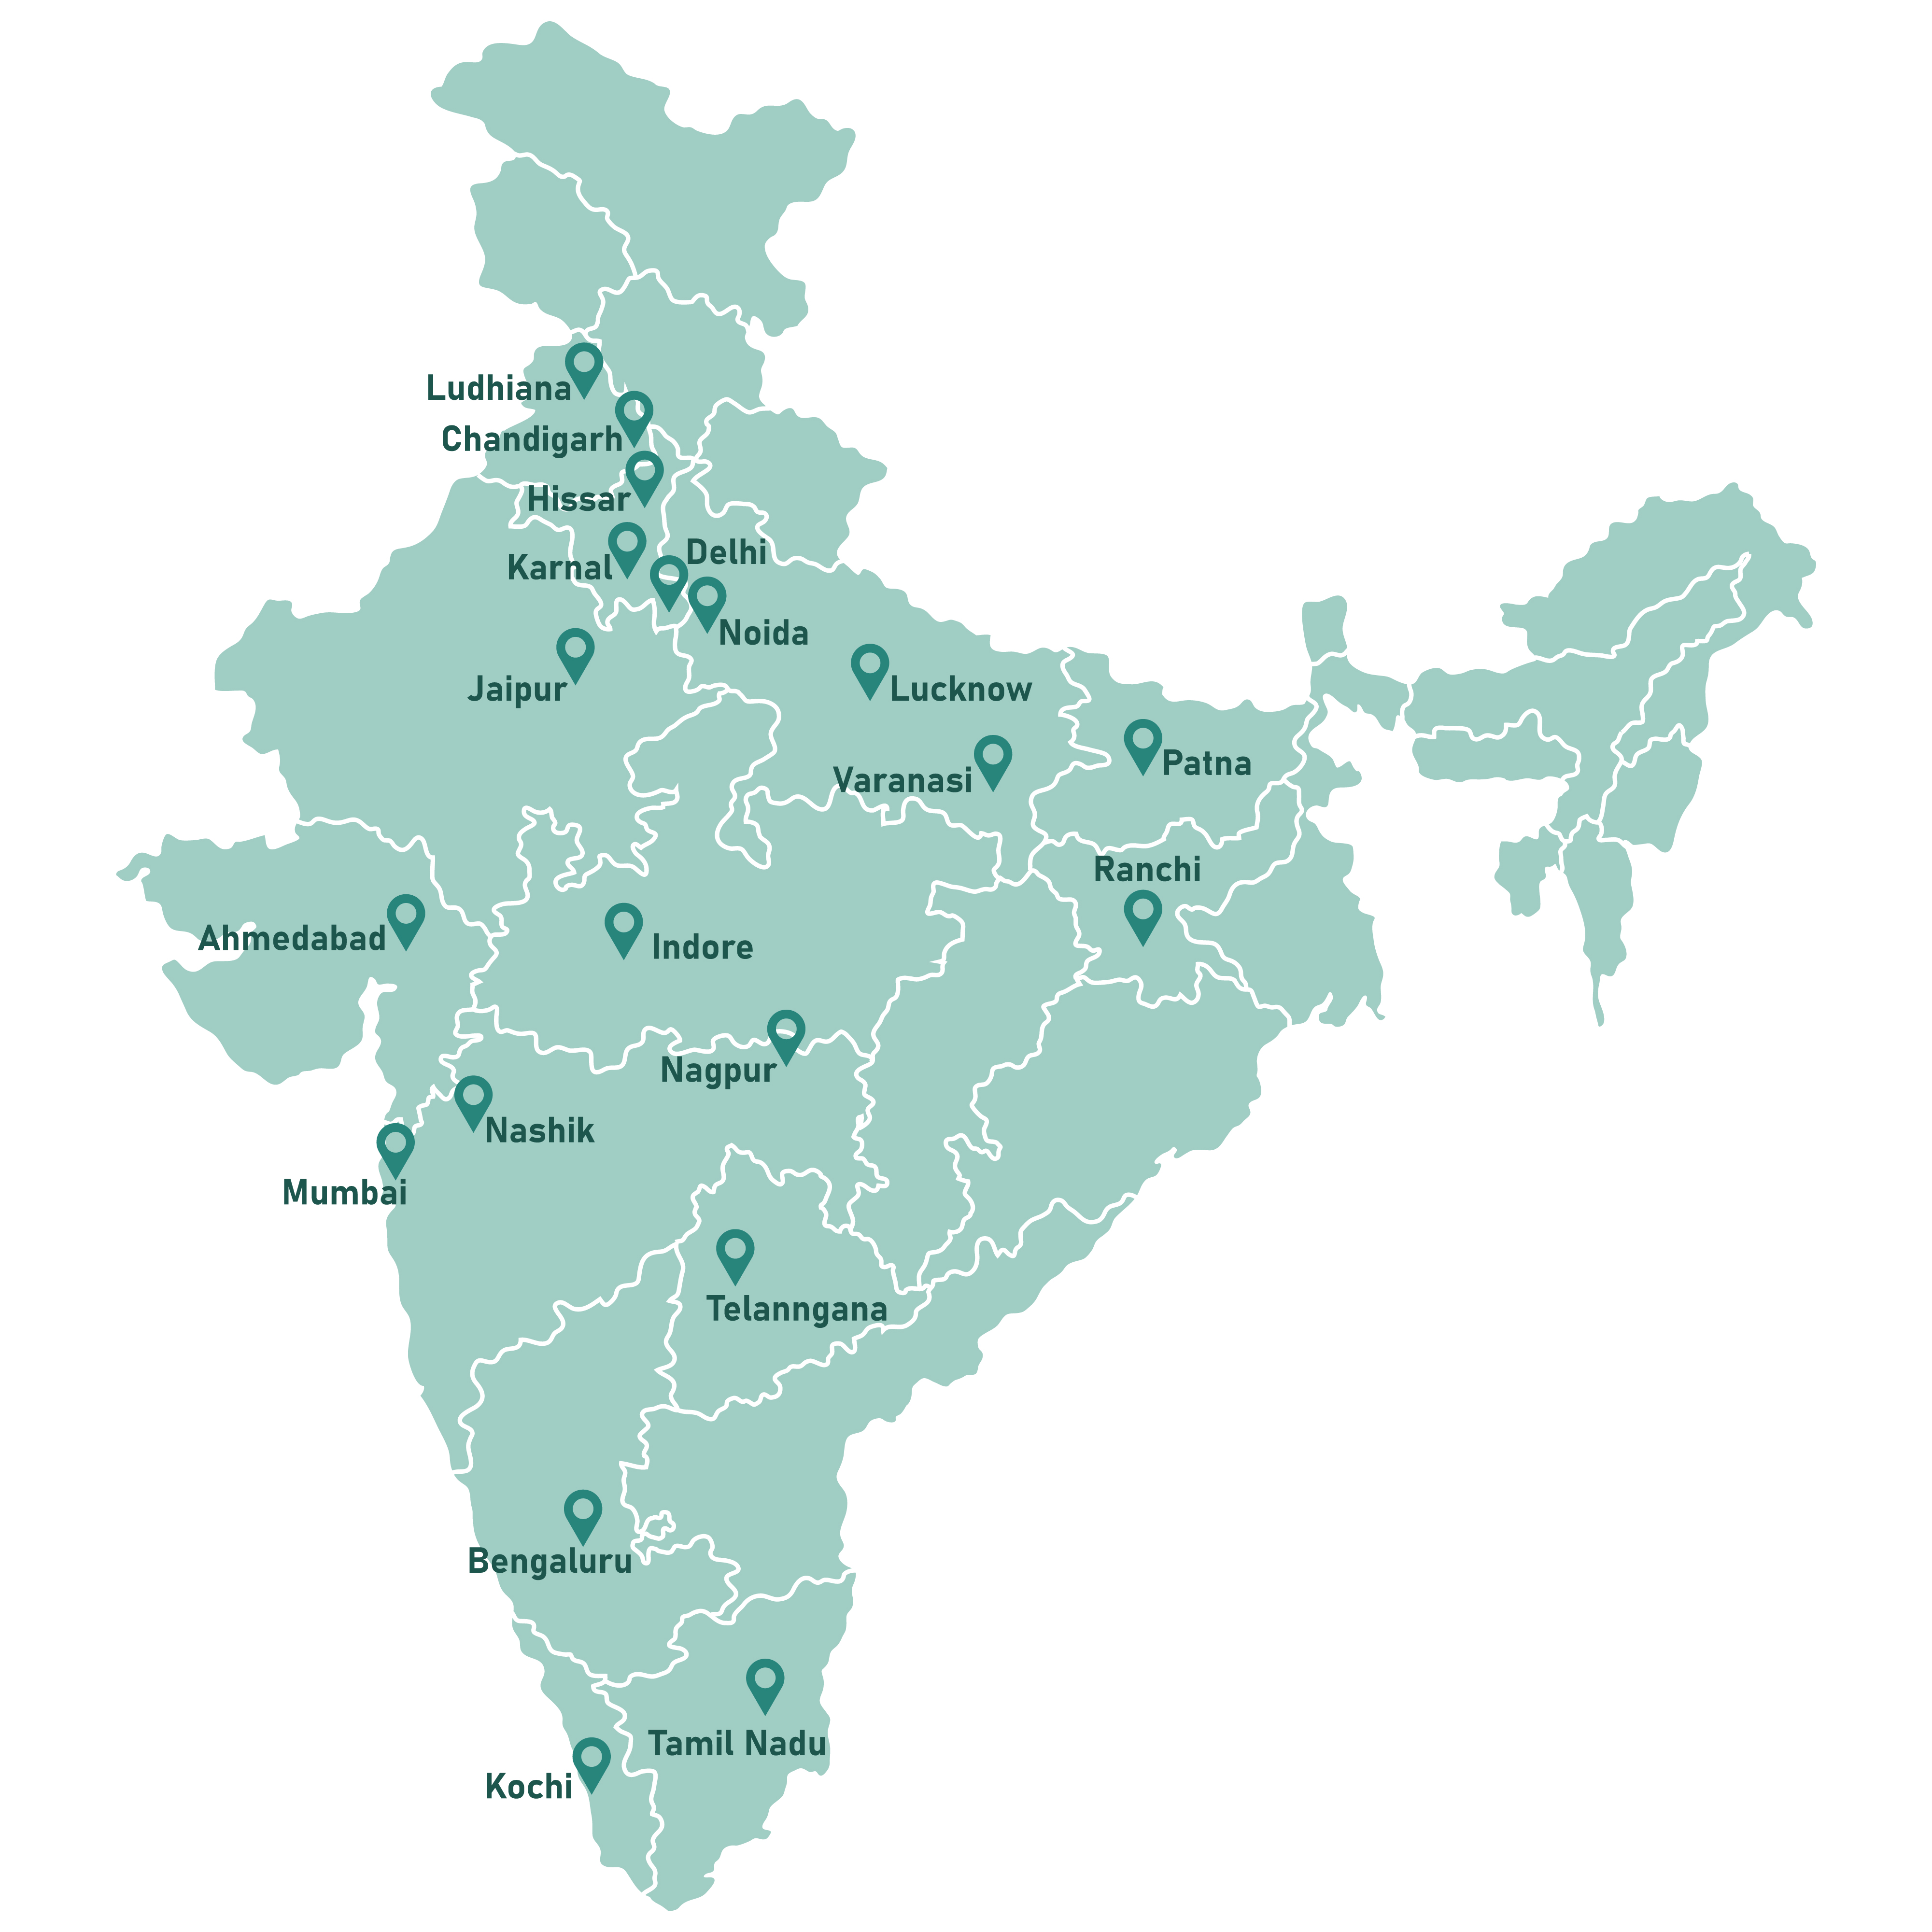 Map for Dr. Seibert's products and services in India